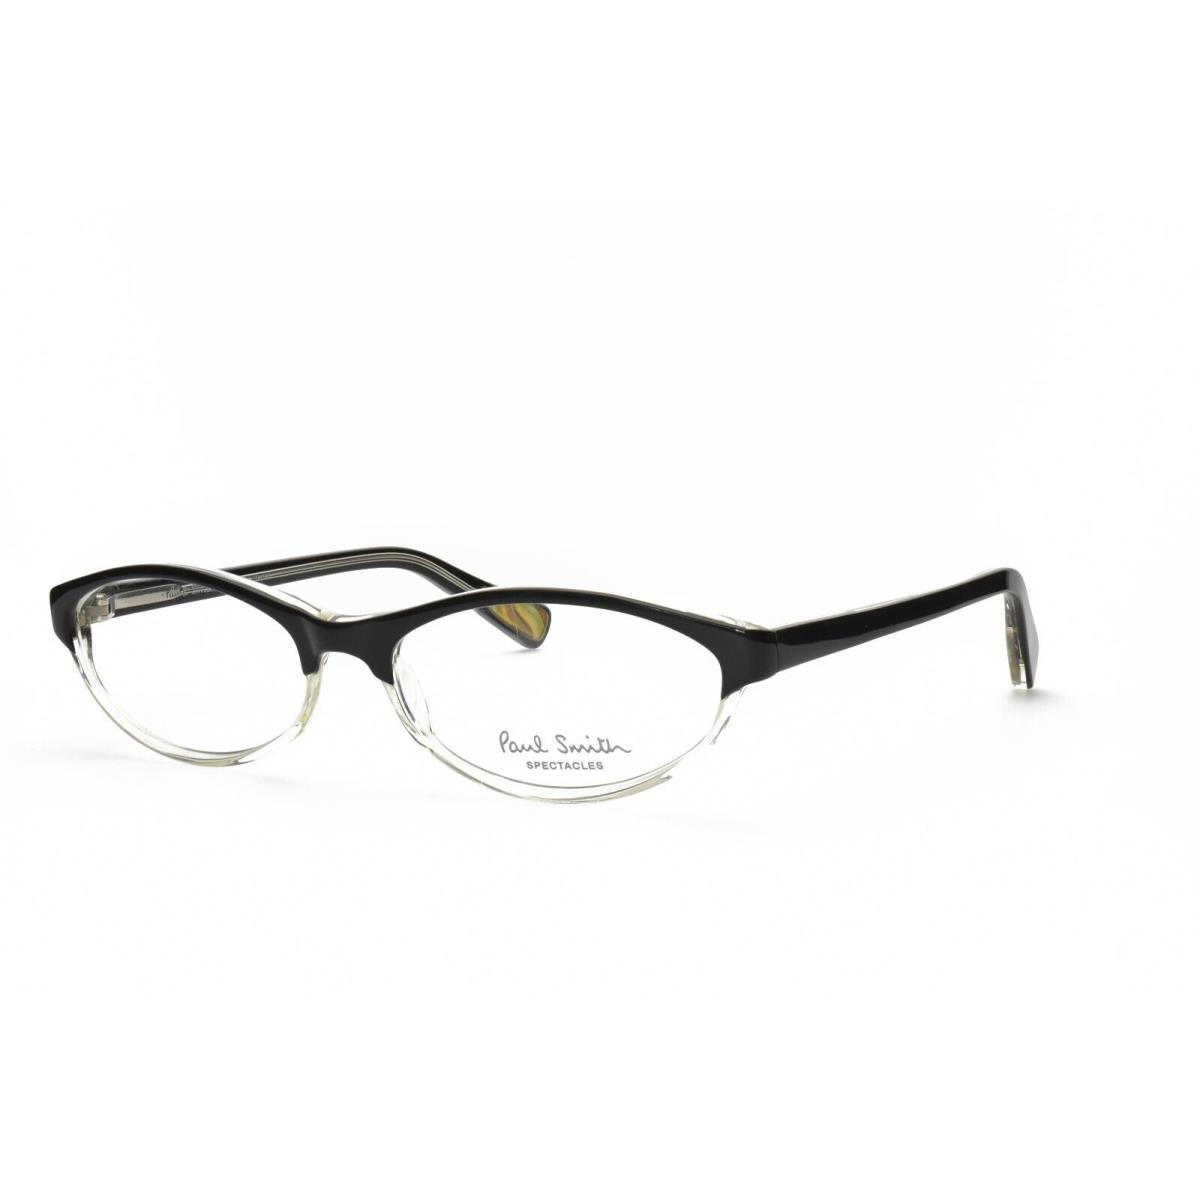 Paul Smith PS 286 OX Eyeglasses Frames Only 52-16-135